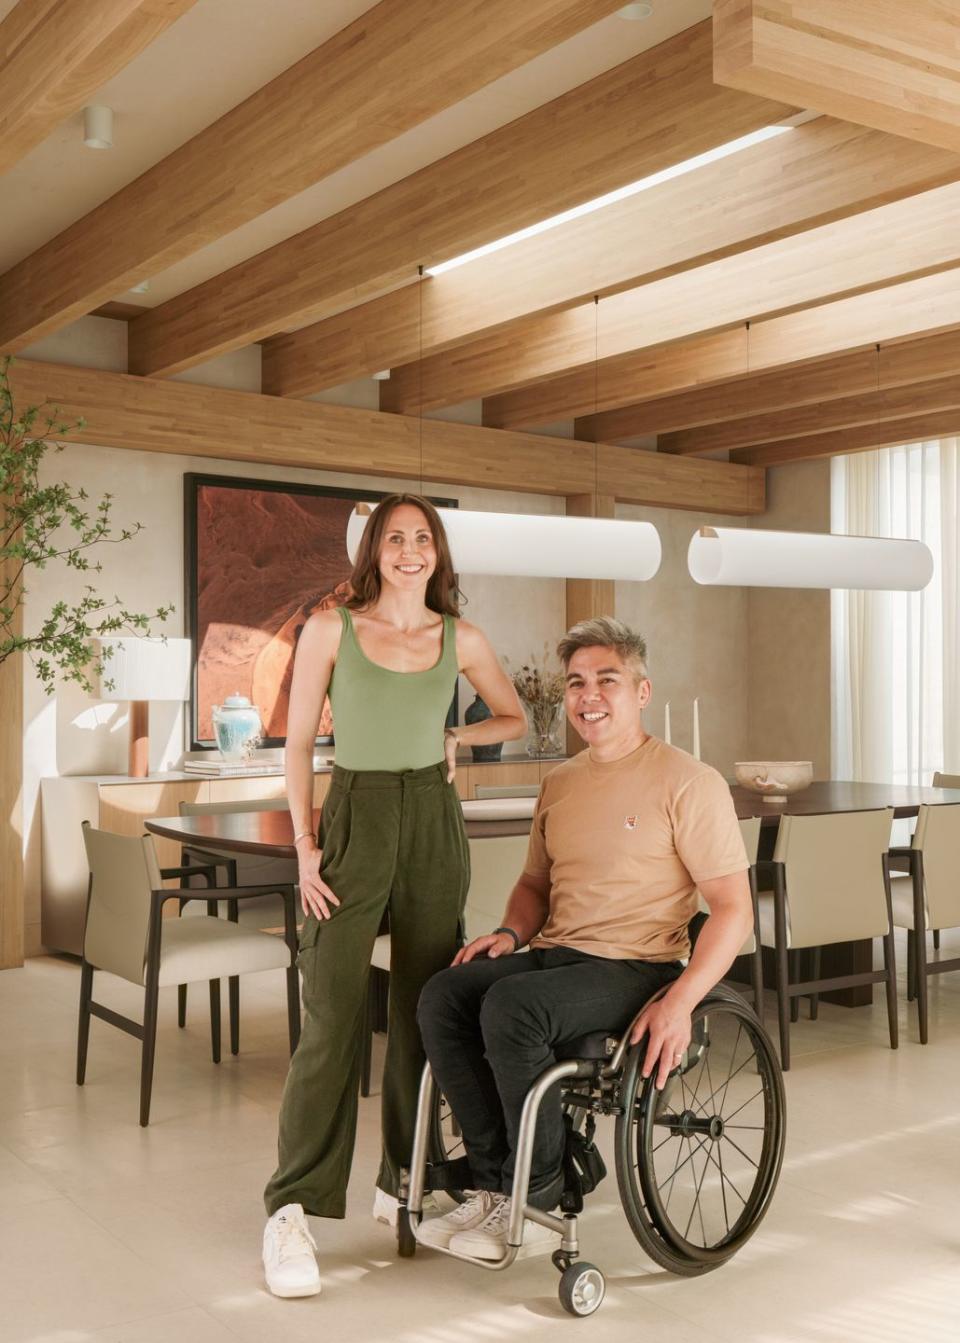 hiroki takeuchi and wife rachel swidenbank in their adapted dulwich home in south london designed by interiors studio covet noir photography by vigo jansons